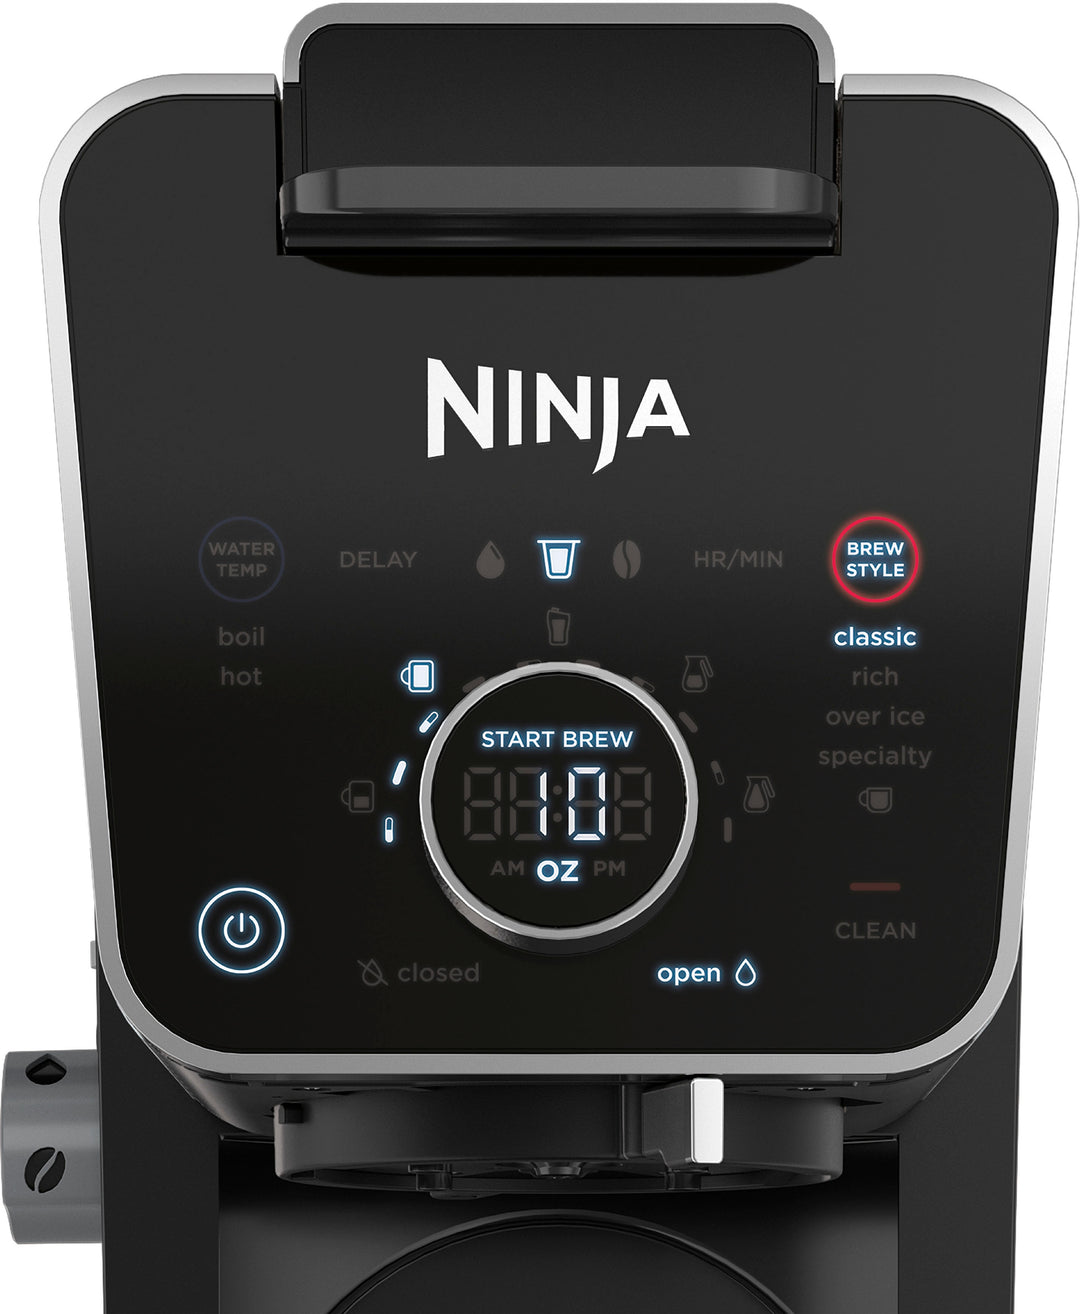 Ninja - DualBrew 12-Cup Specialty Coffee System with K-cup compatibility, 4 brew styles, and Frother - Black/Silver_5